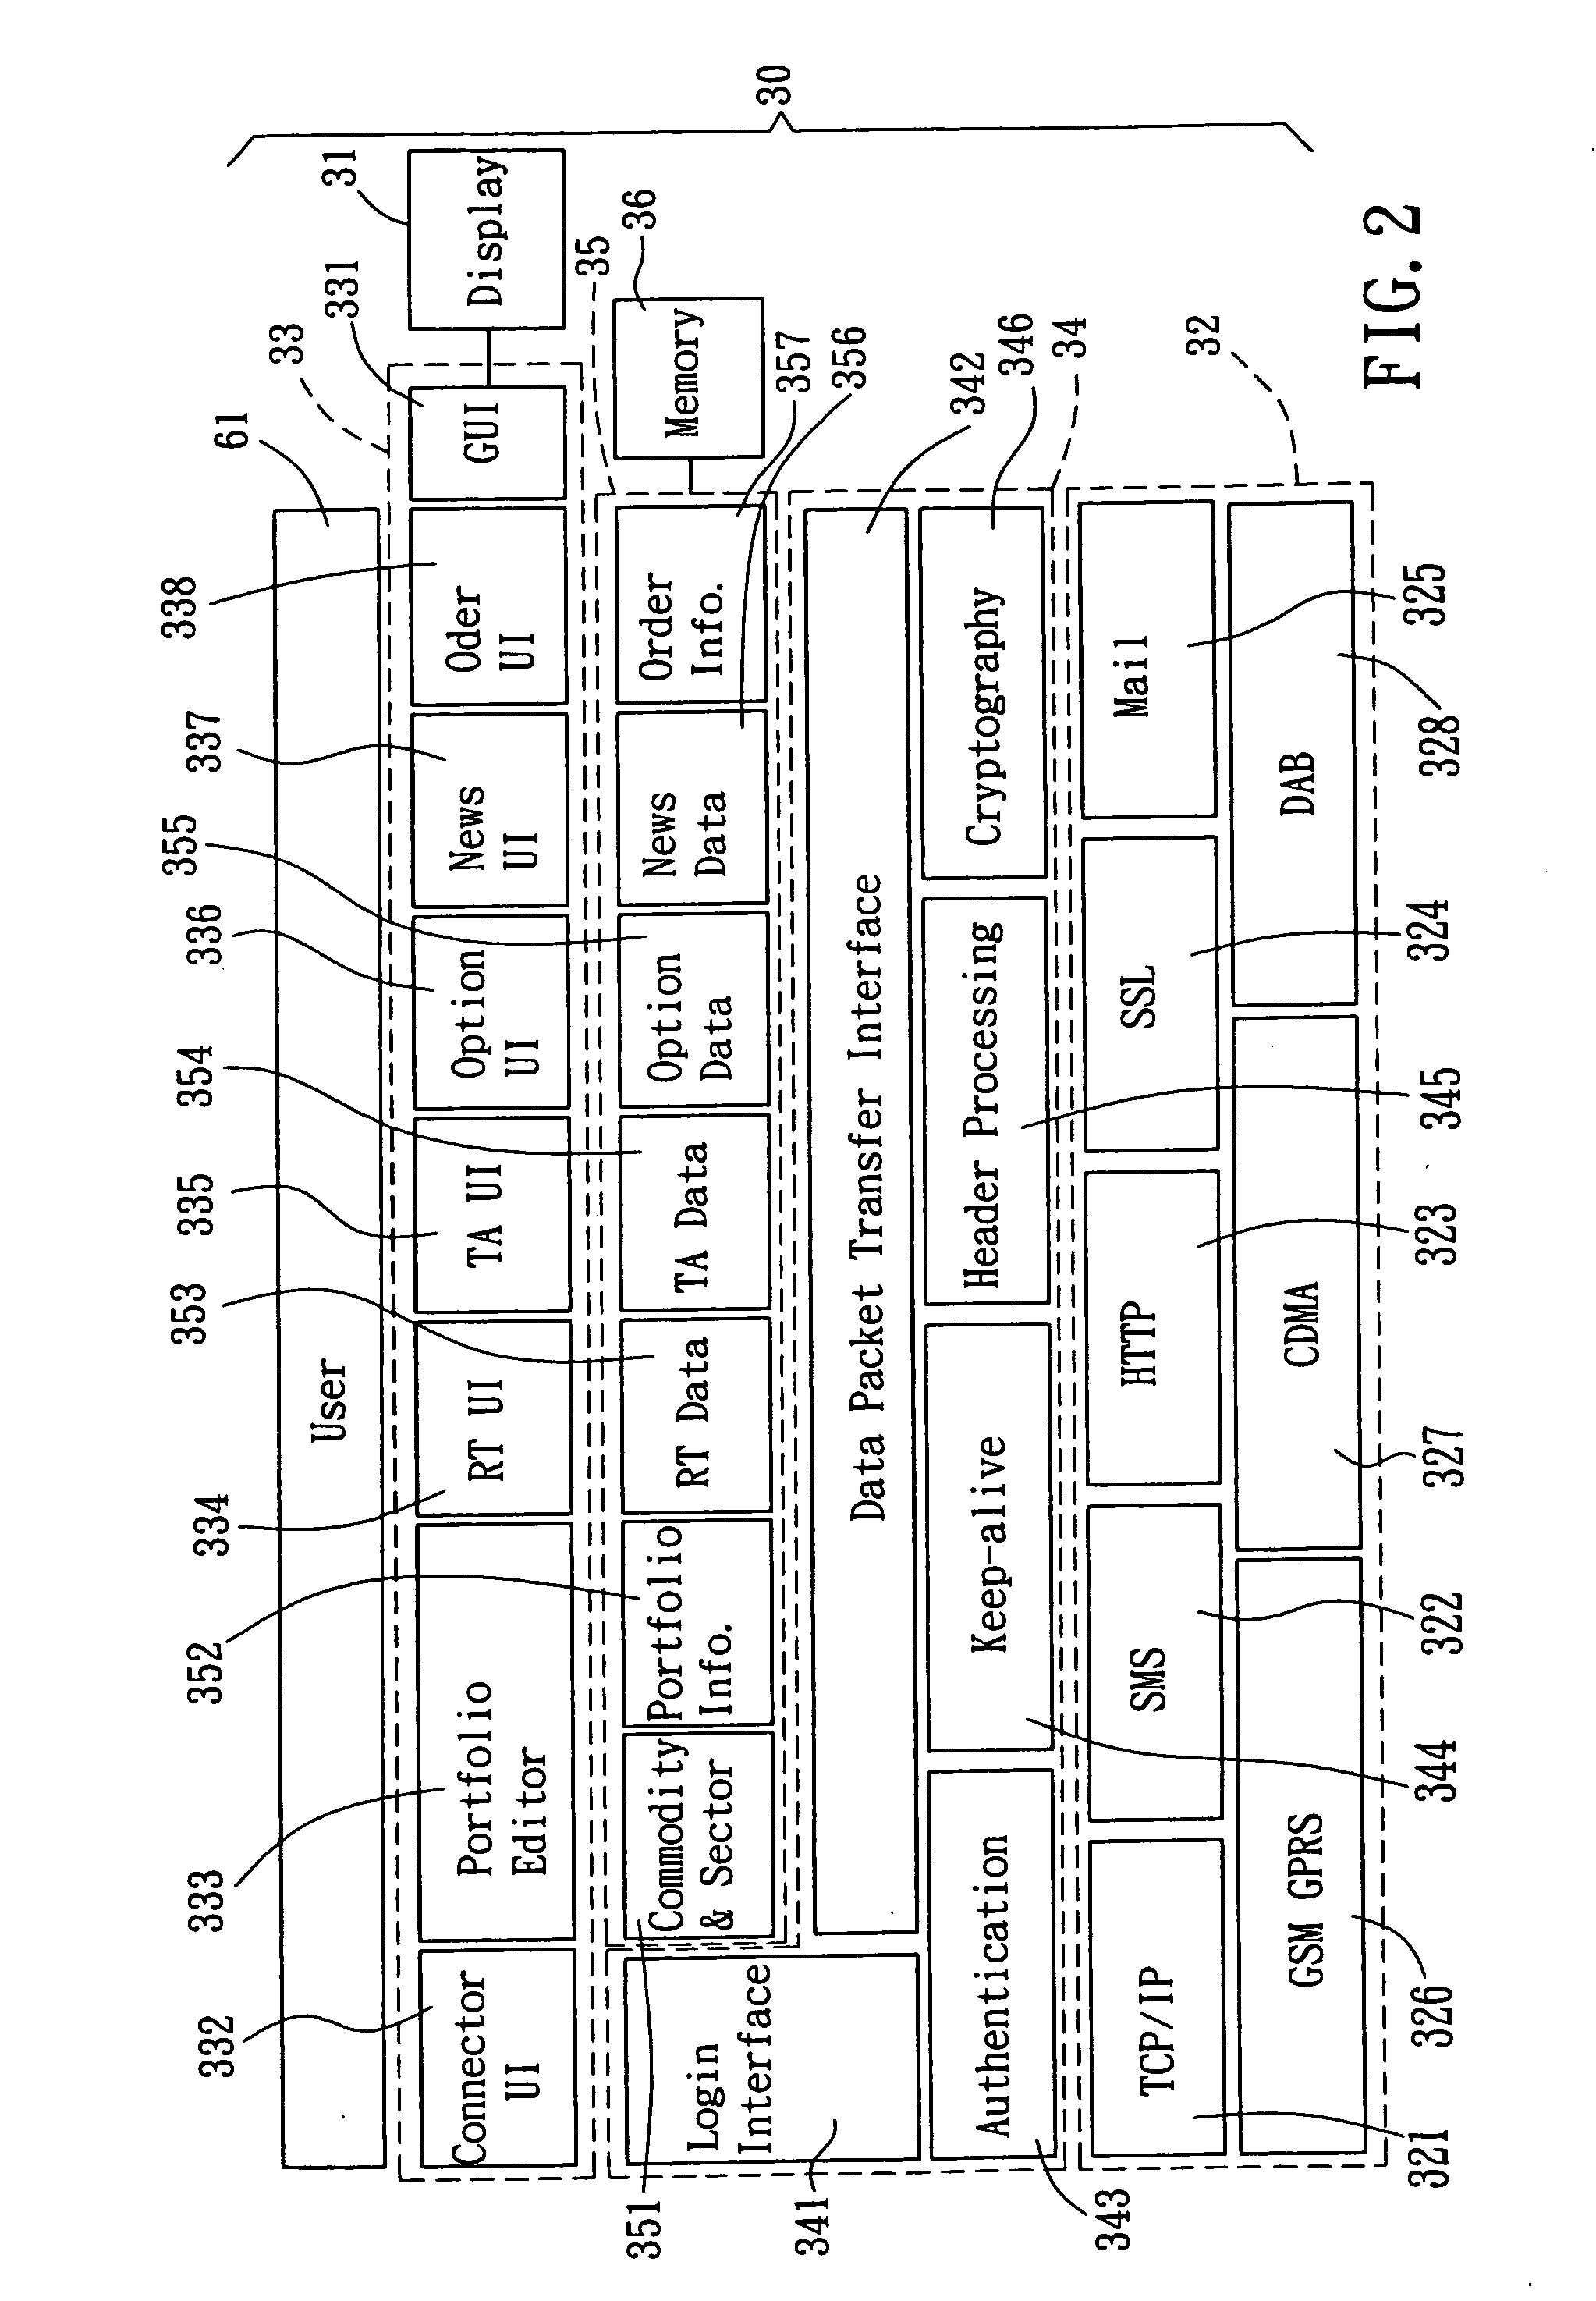 Distributed push-pull information service system